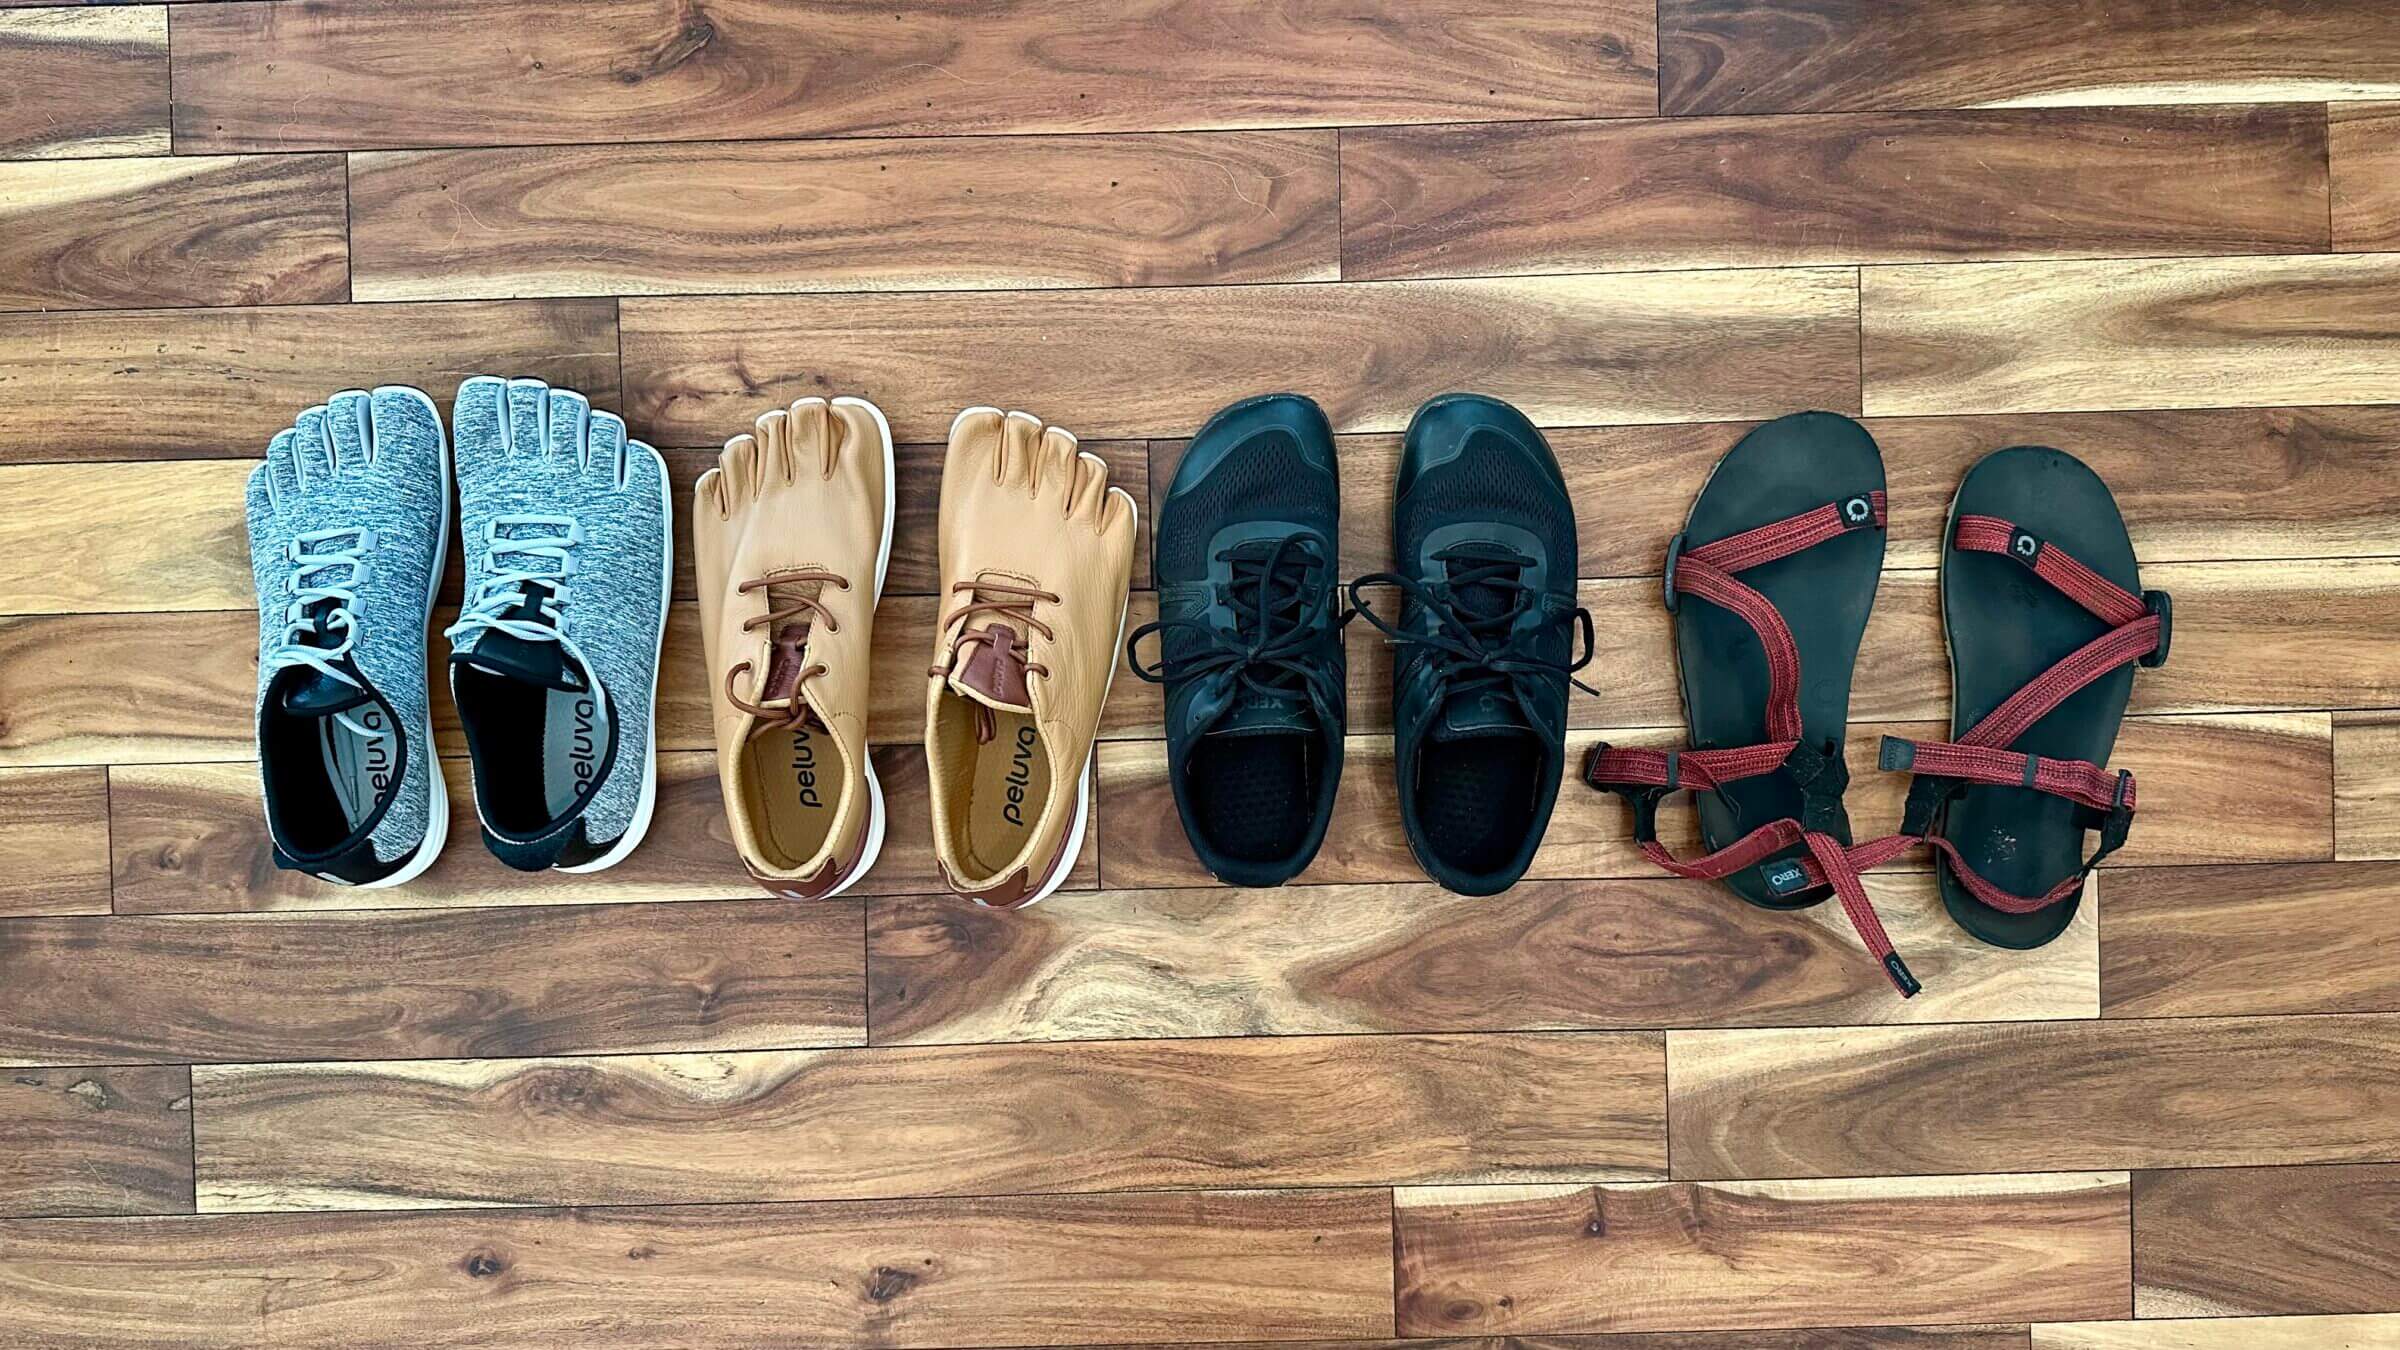 Sandals are tricky. They give your feet a lot more freedom than close toed  shoes, but I still stay away from the “regular” sandals yo... | Instagram